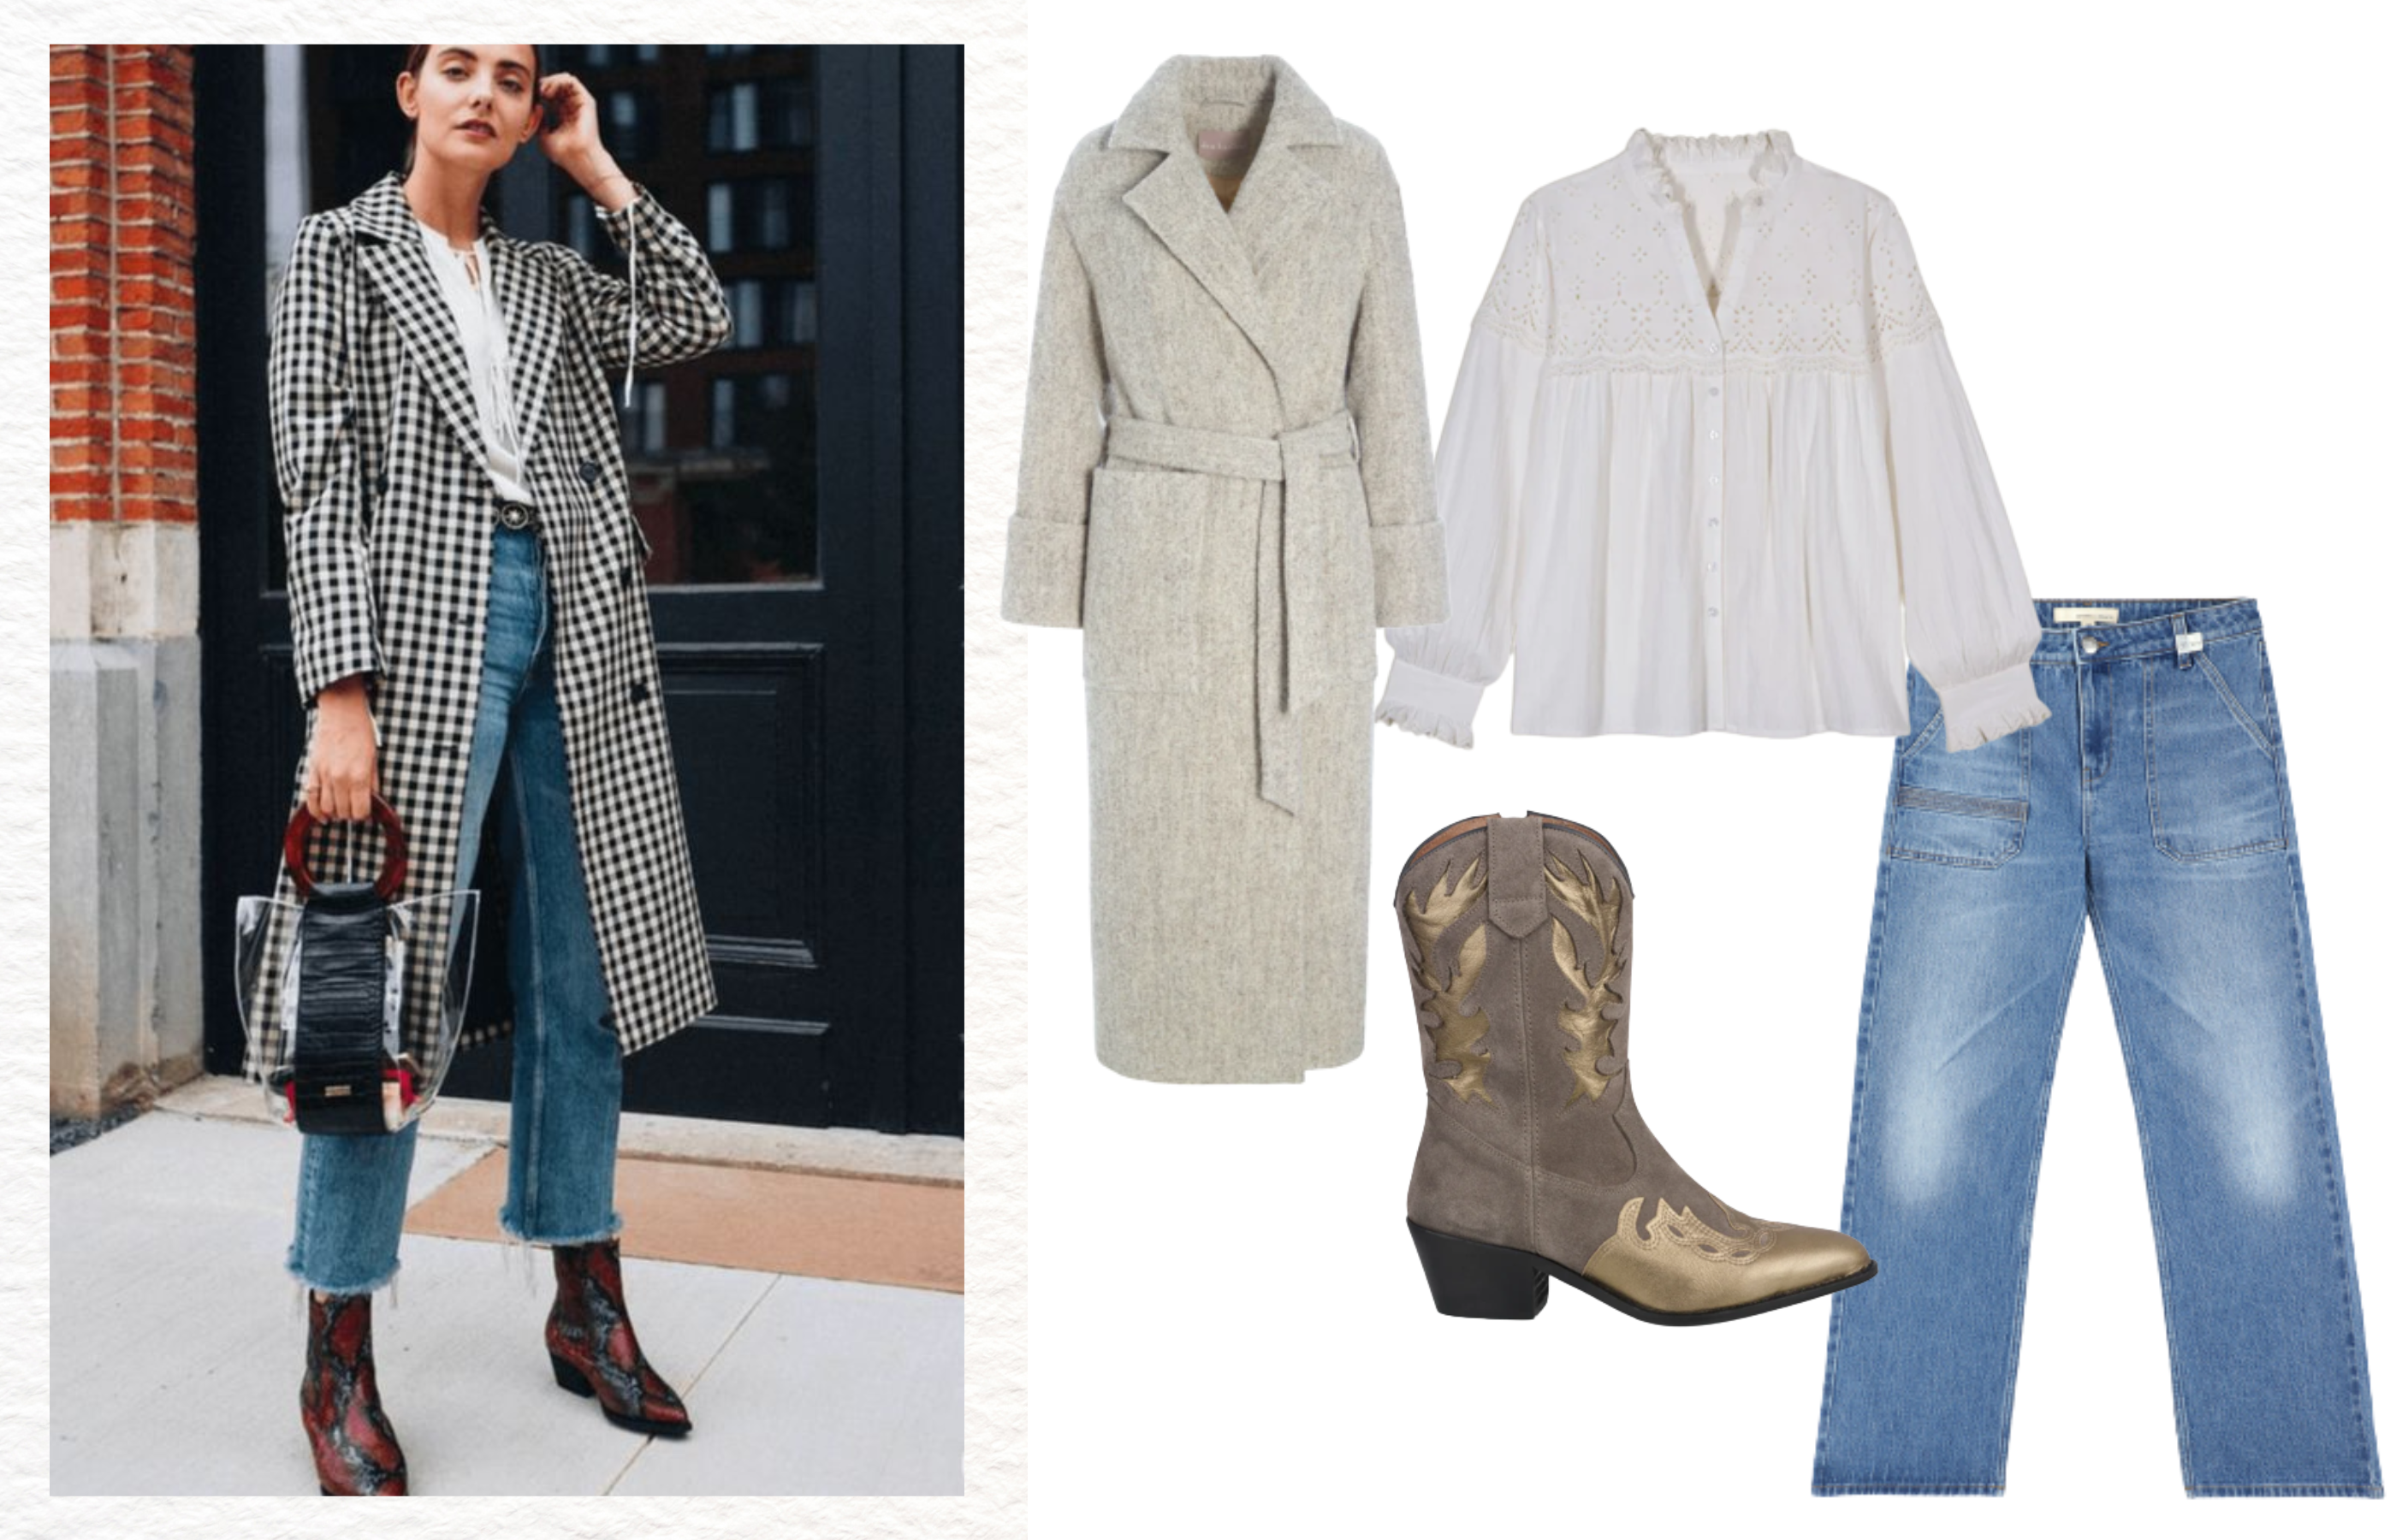 Outfit 3 - Jeans, Blouse, Coat and Short Ankle Cowboy Boots